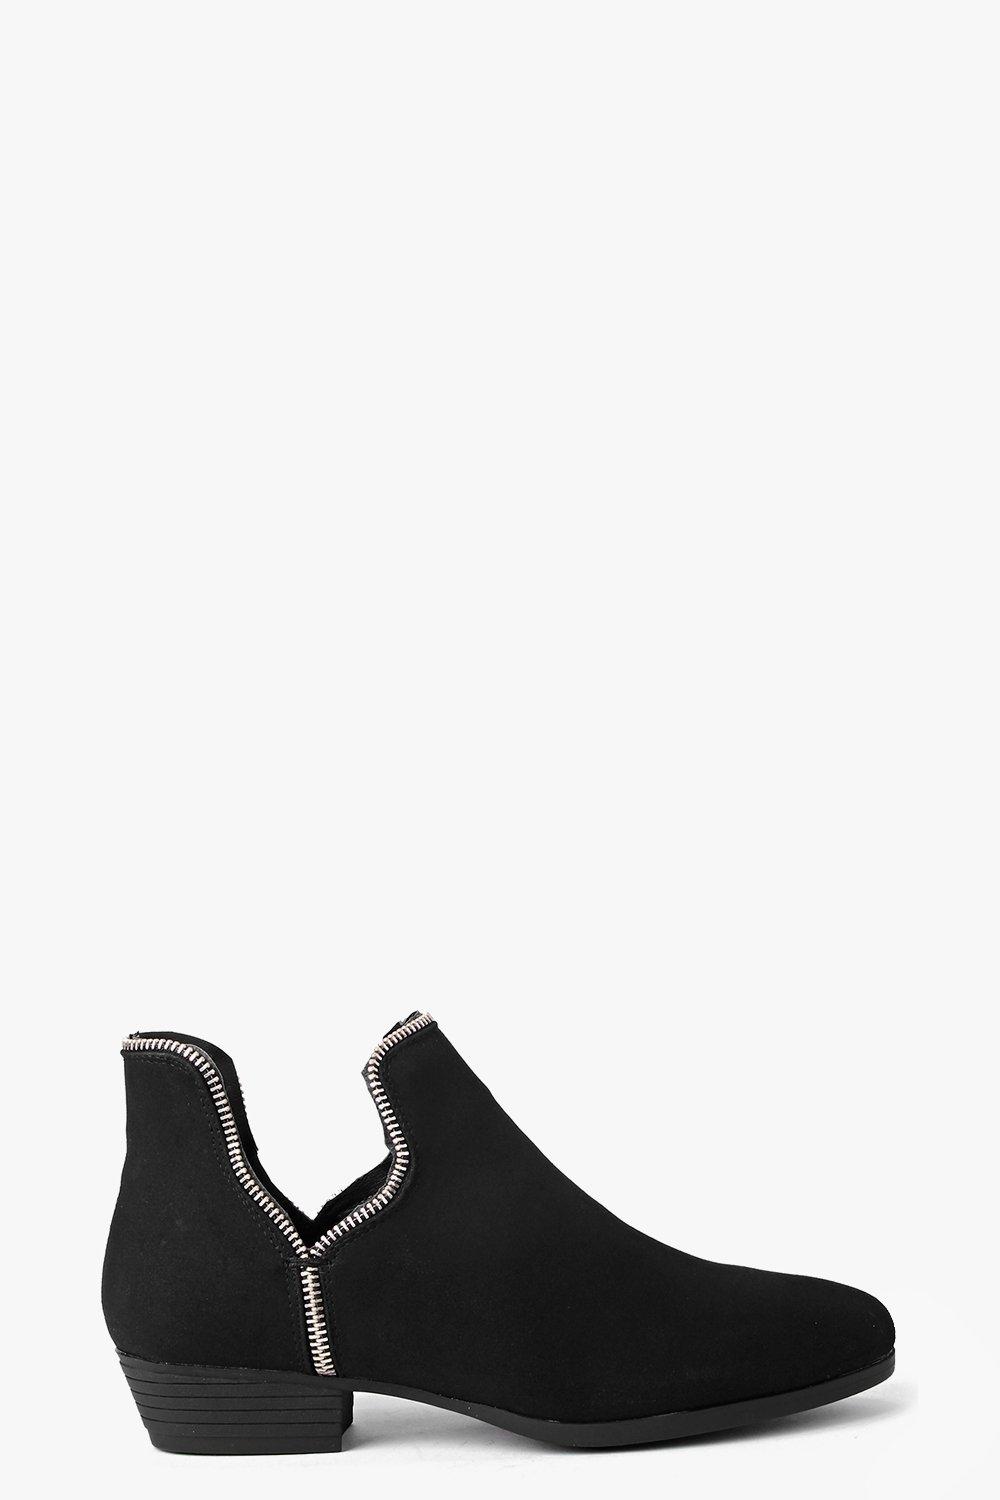 Tilly Zip Trim Cut Away Ankle Boot at boohoo.com